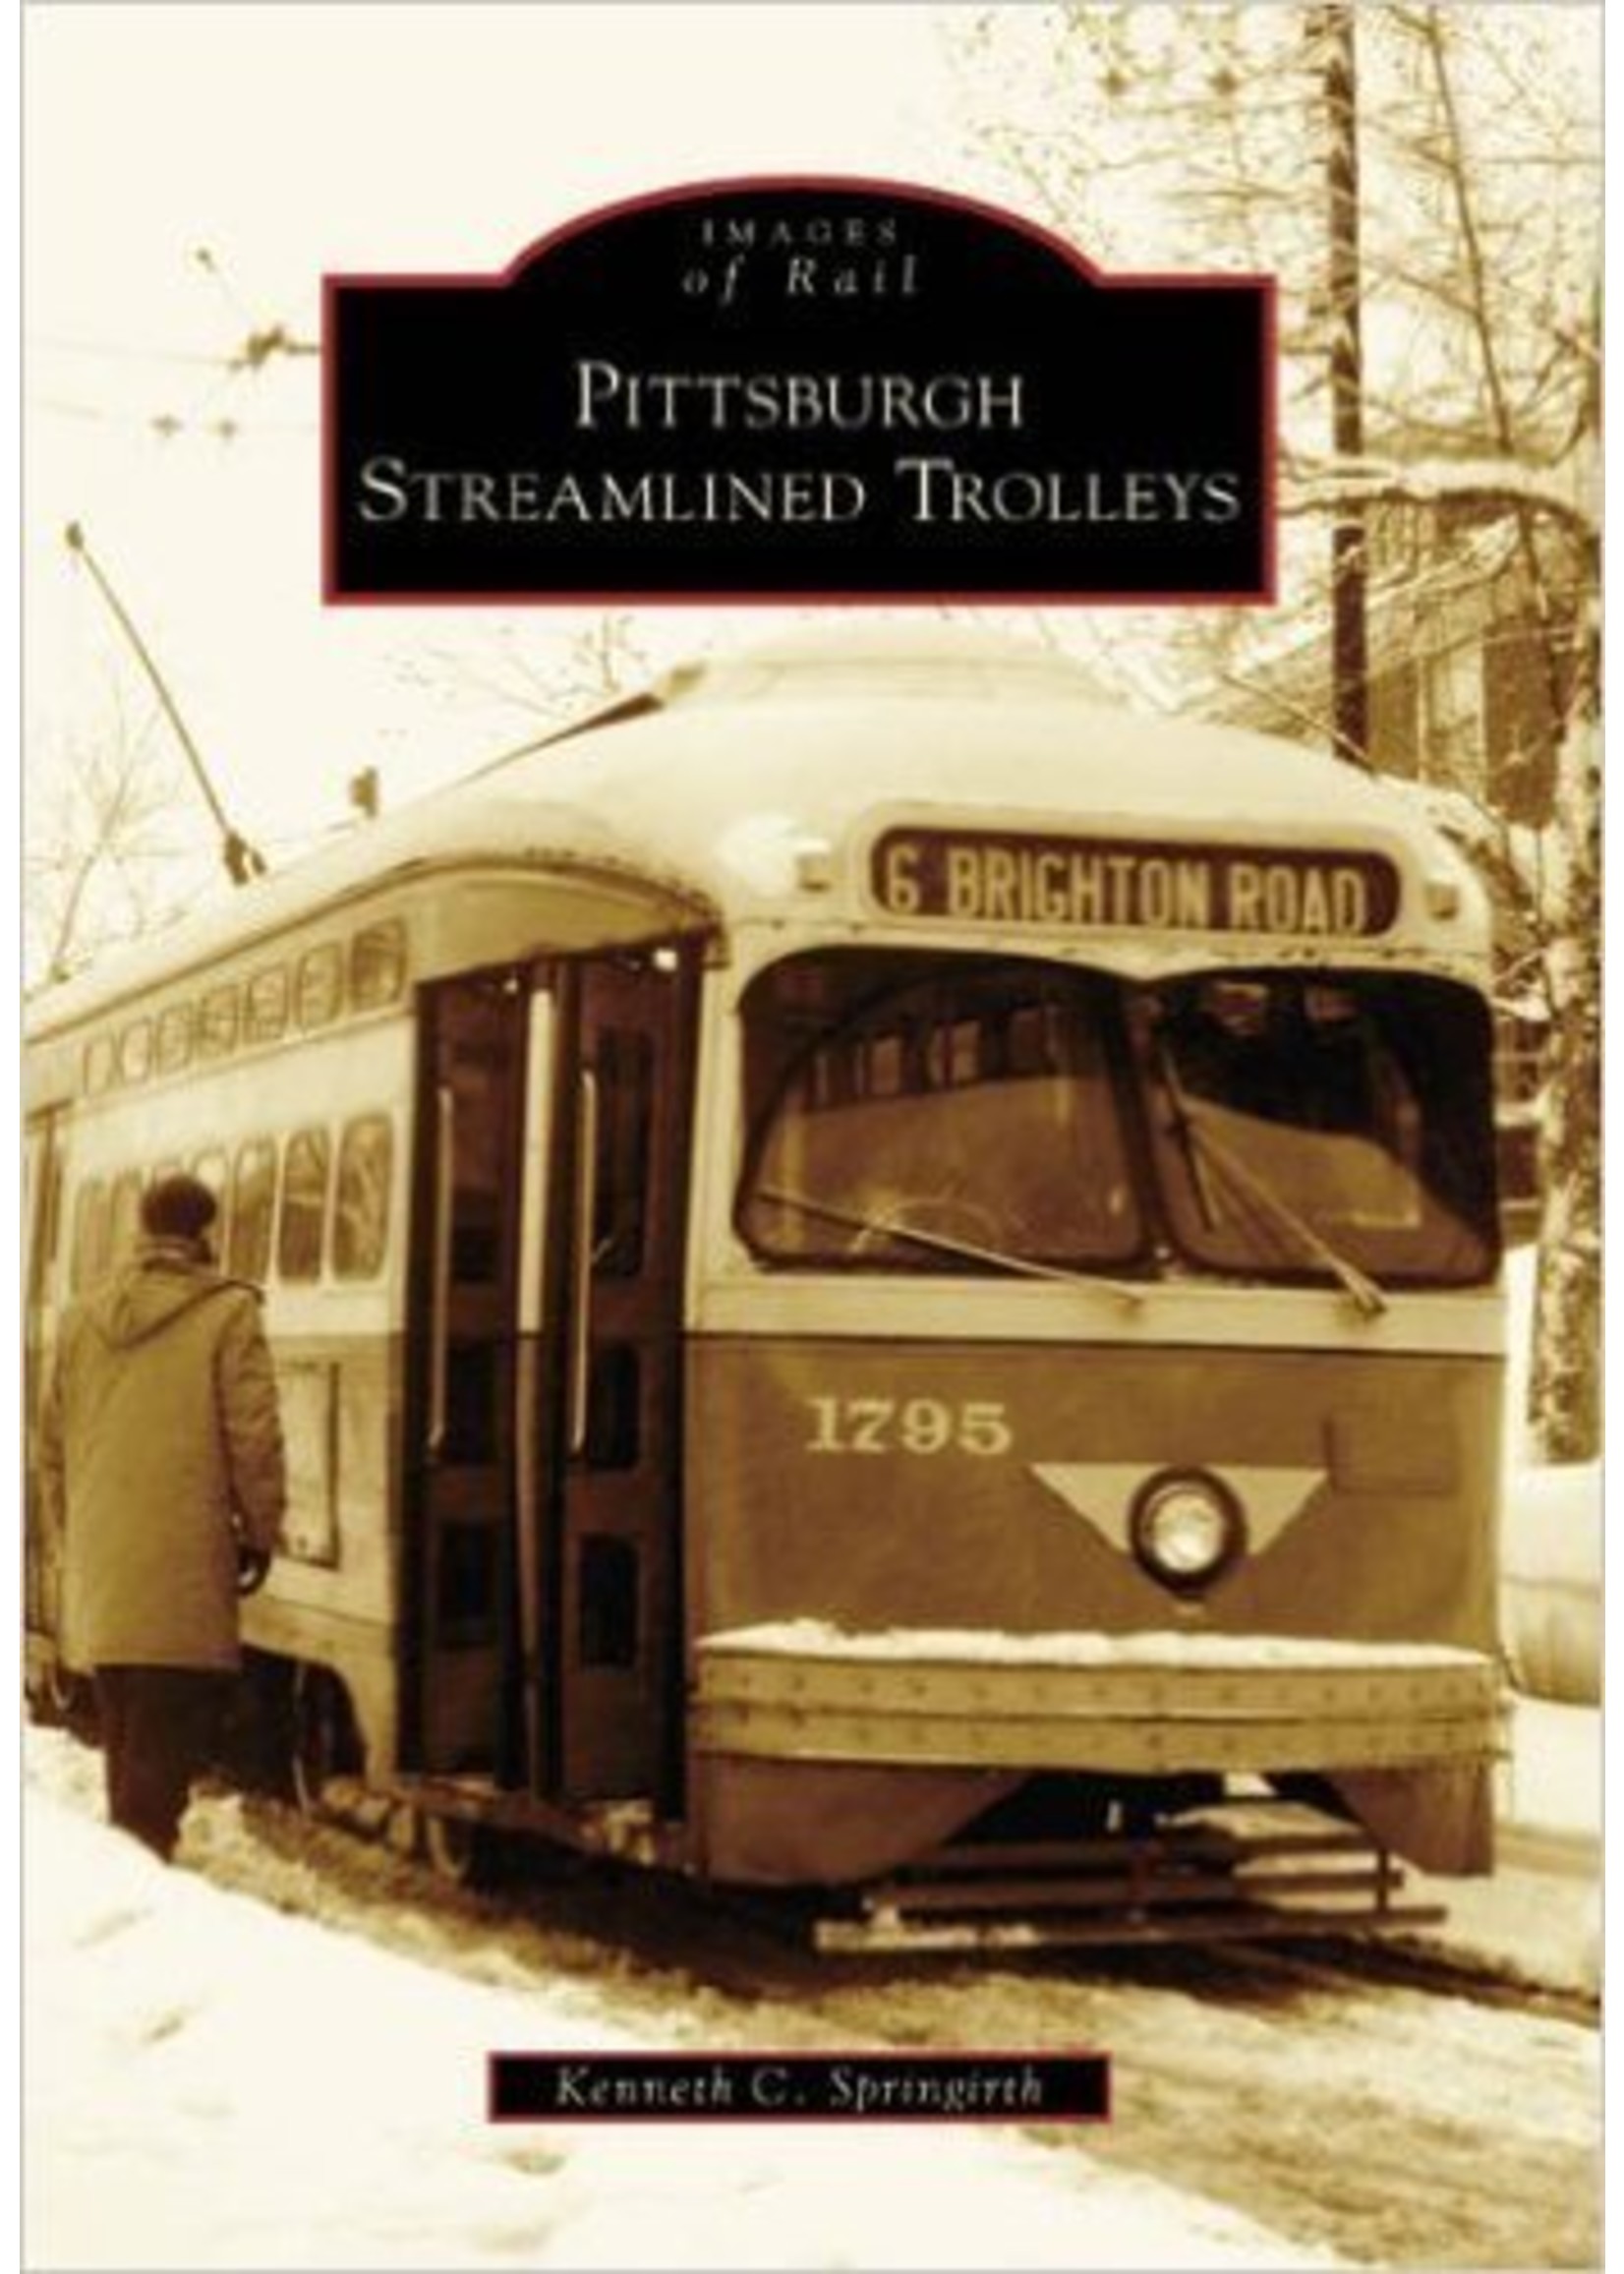 Images of Rail Pittsburgh Streamlined Trolleys *SIGNED